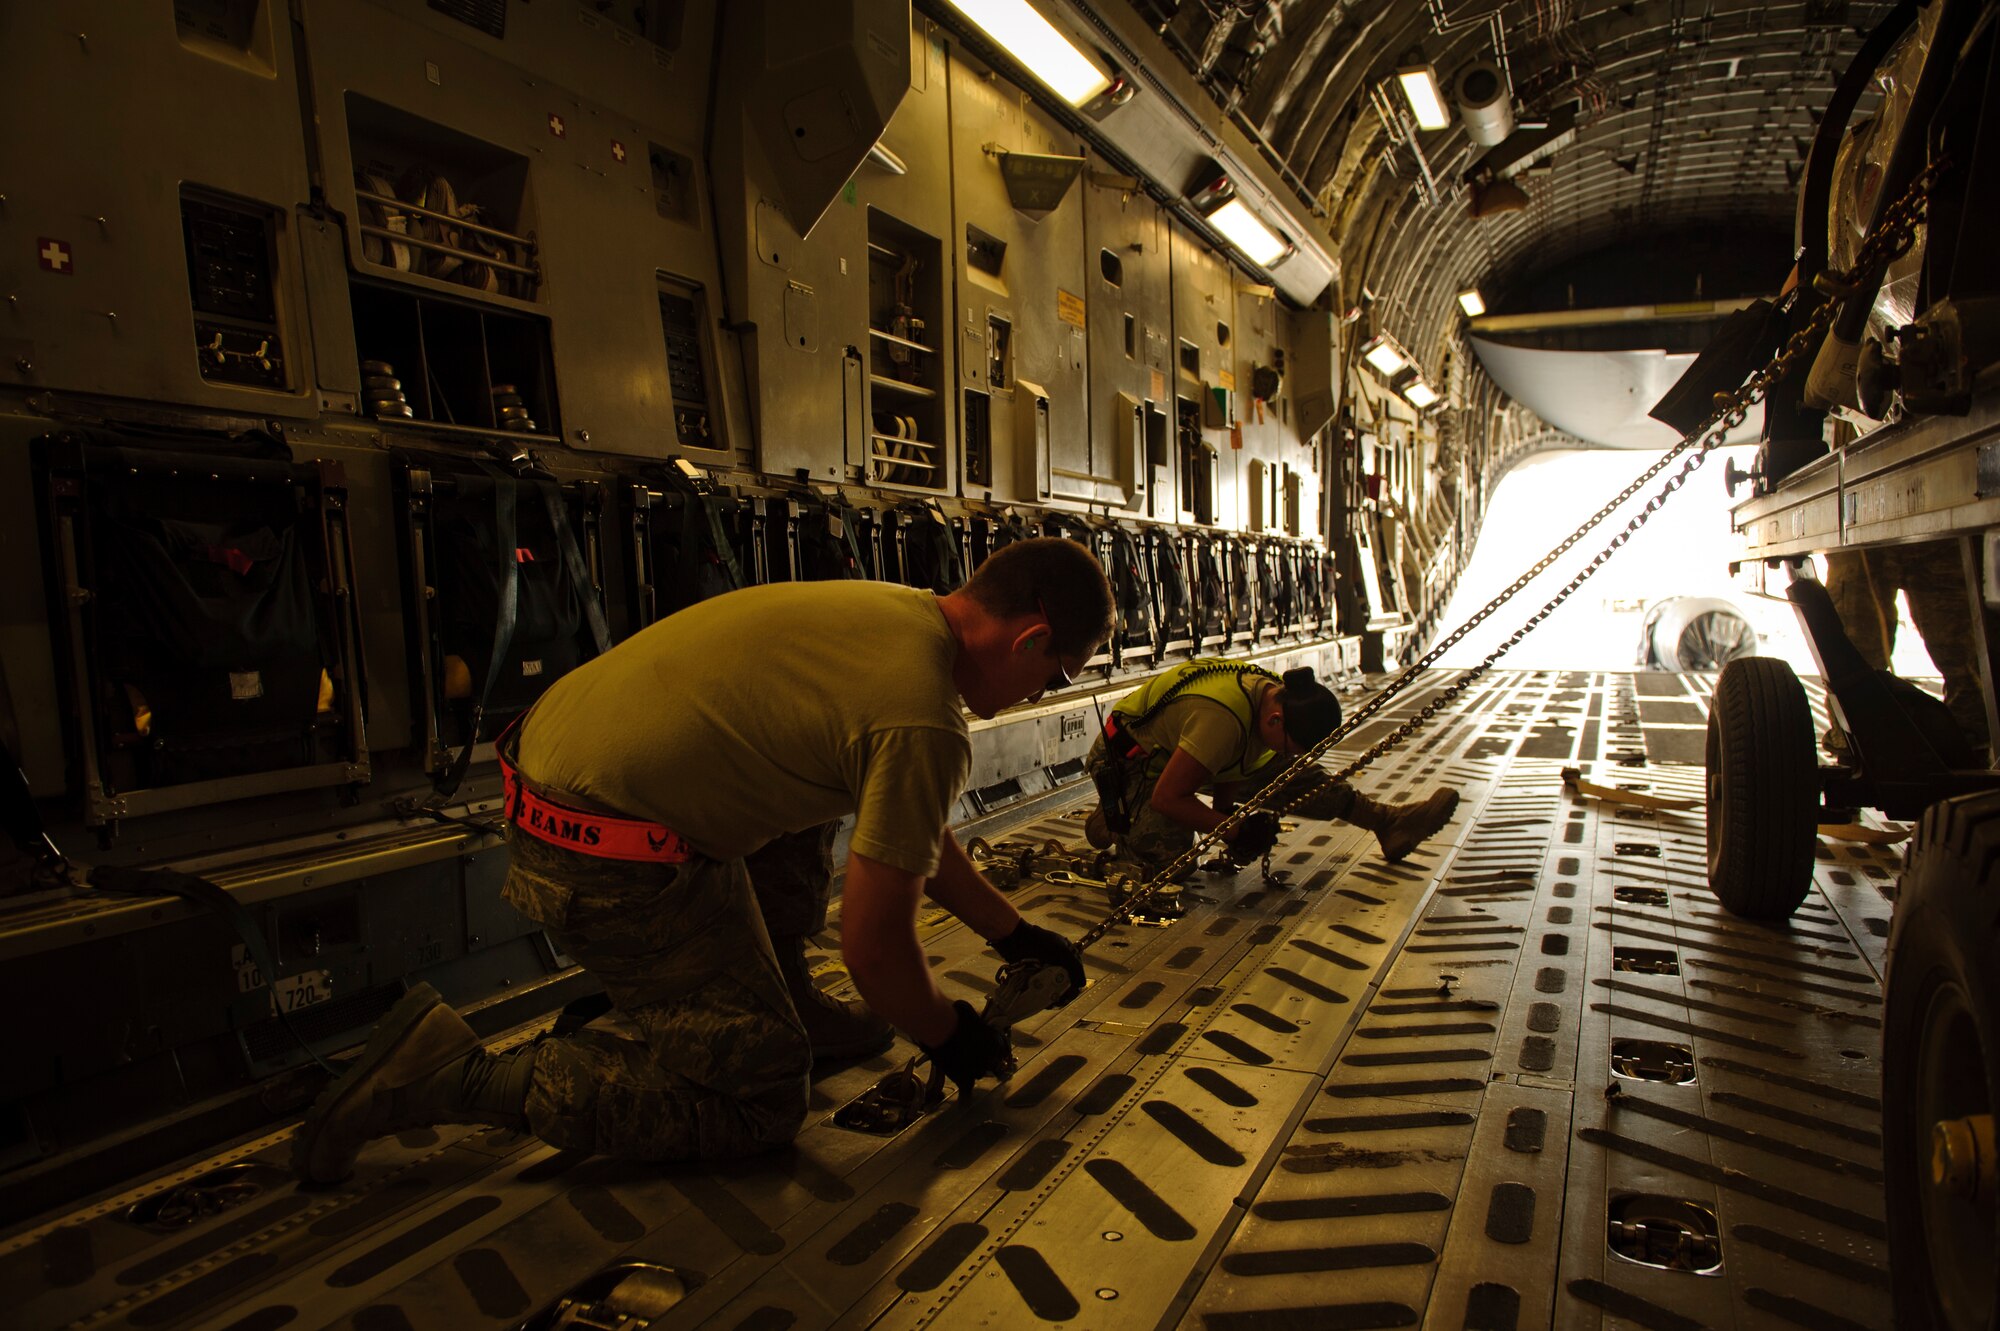 SOUTHWEST ASIA – Airmen from the 8th Expeditionary Air Mobility Squadron secure an aircraft engine inside a C-17 Globemaster III for loading here April 25, 2012. (U.S. Air Force photo/Staff Sgt. Nathanael Callon)